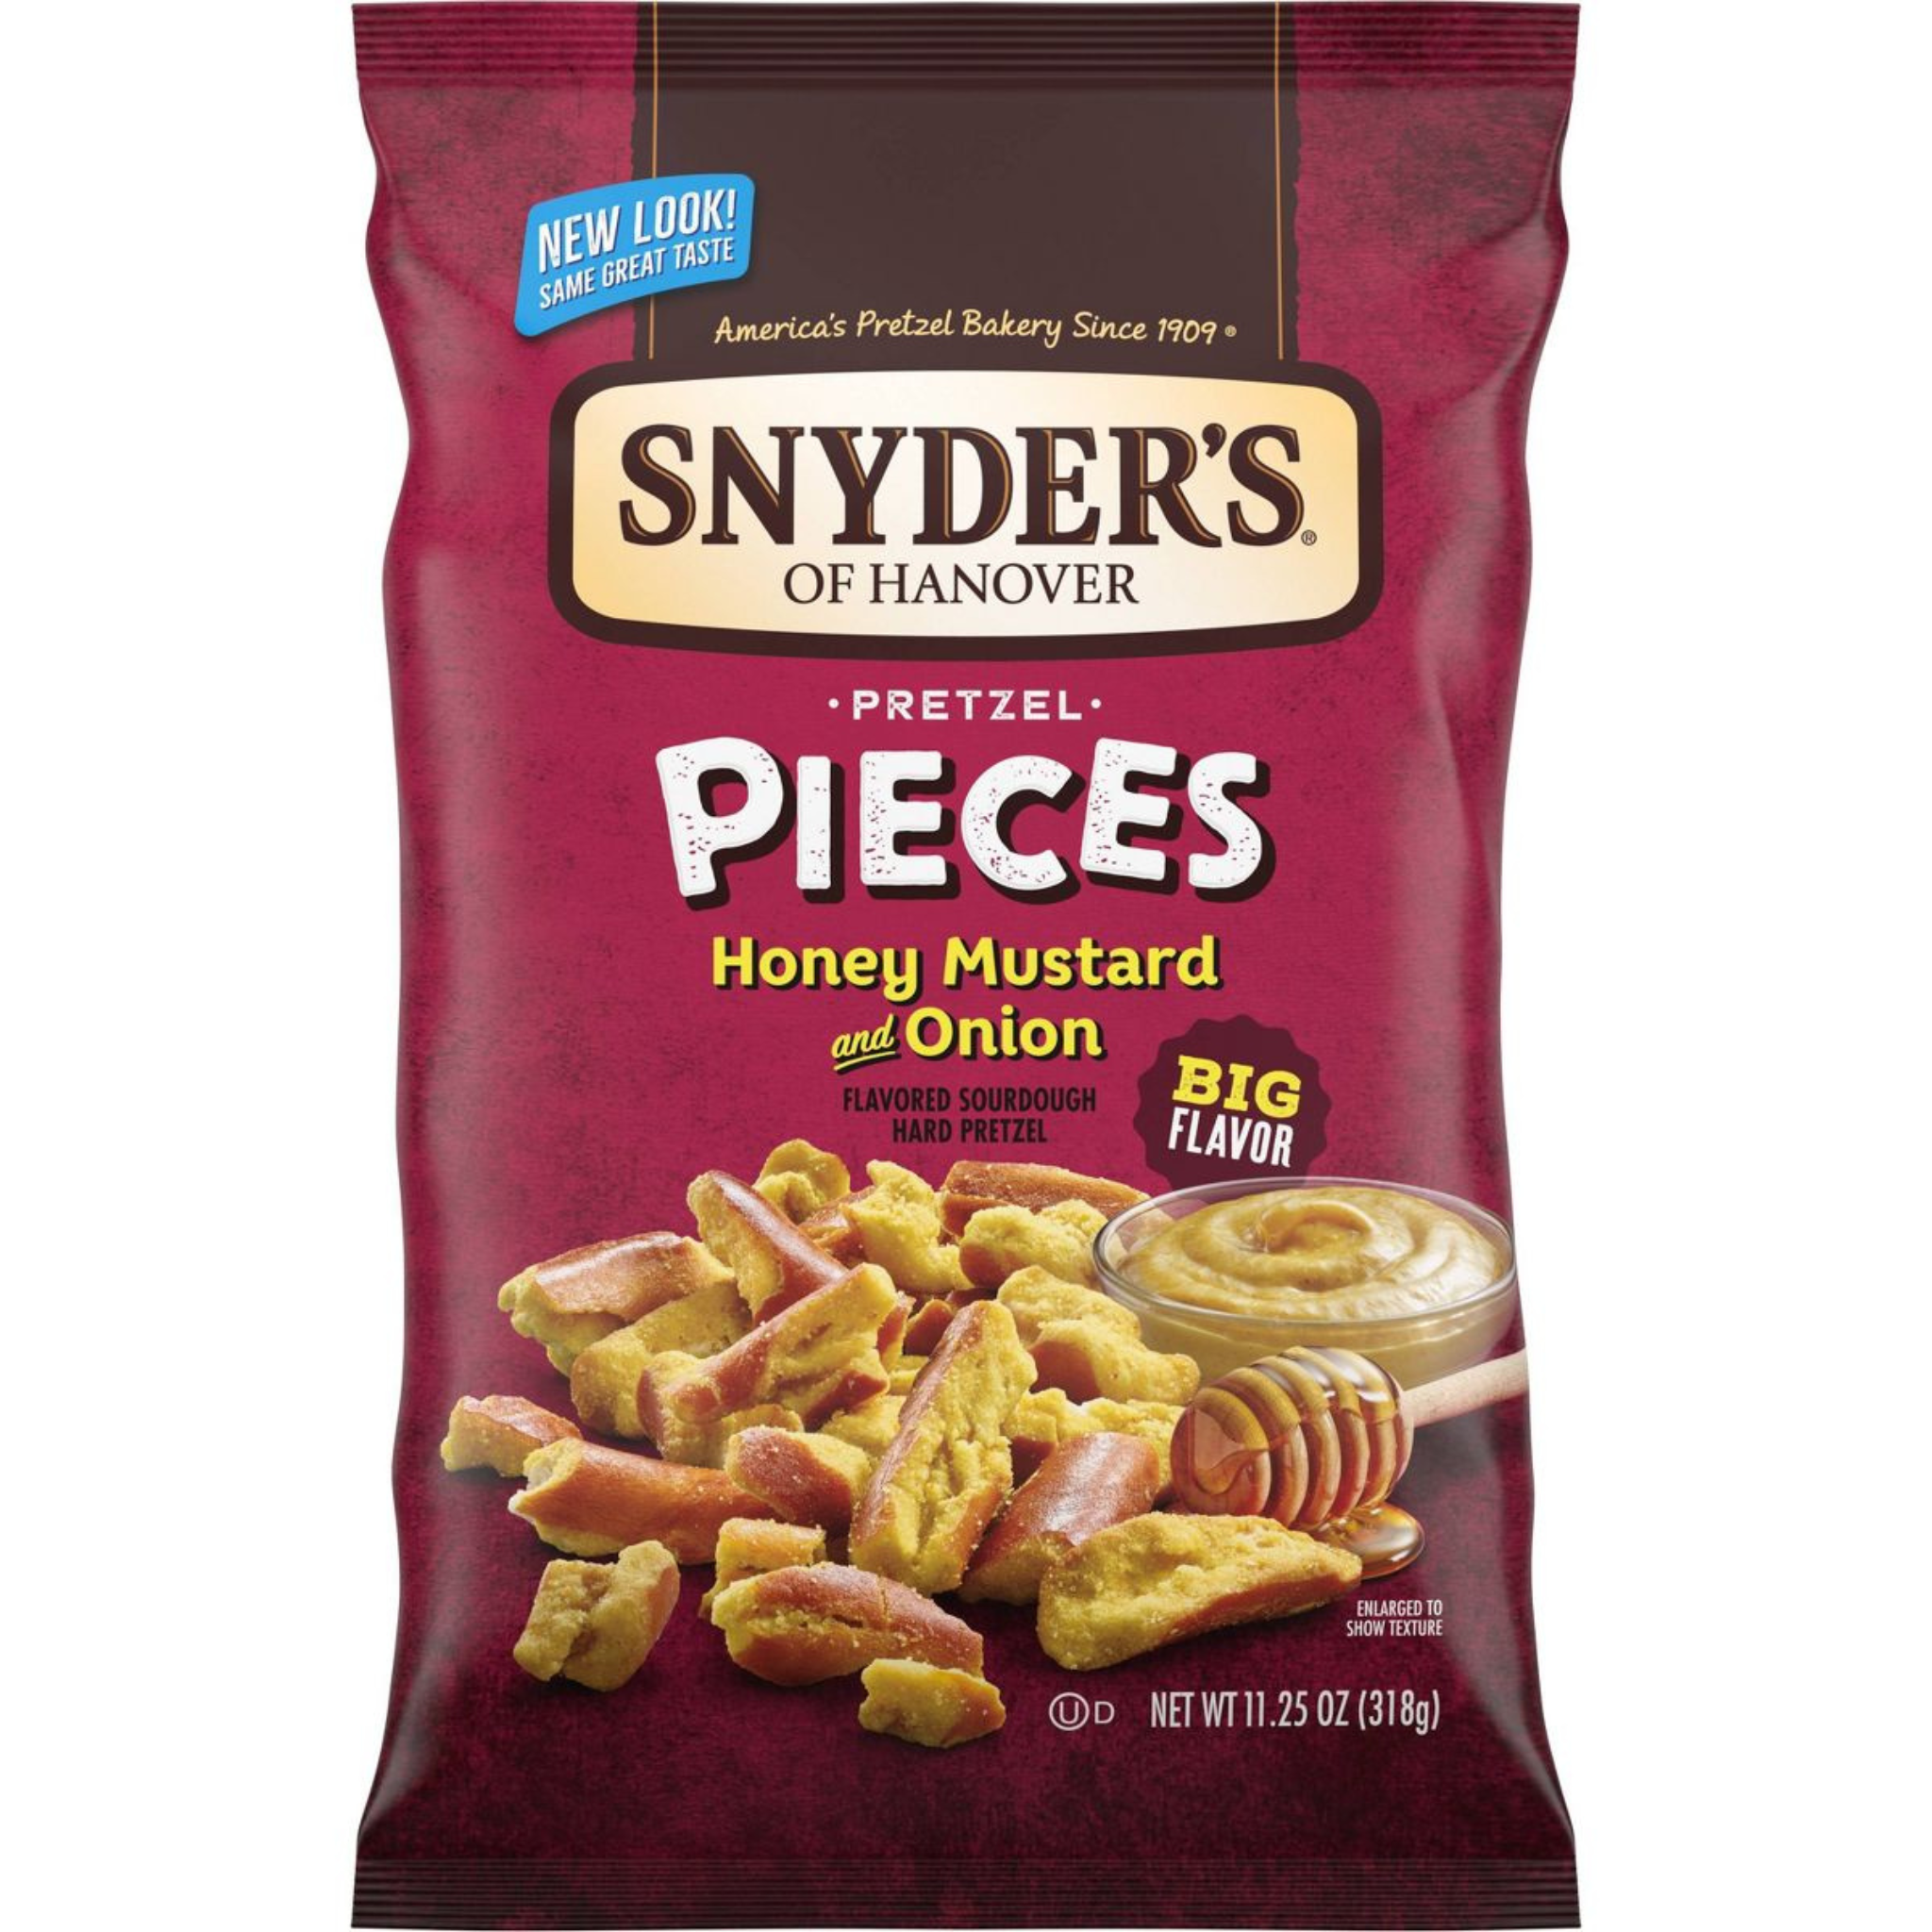 Snyder's Pieces Honey Mustard and Onion 11.25oz